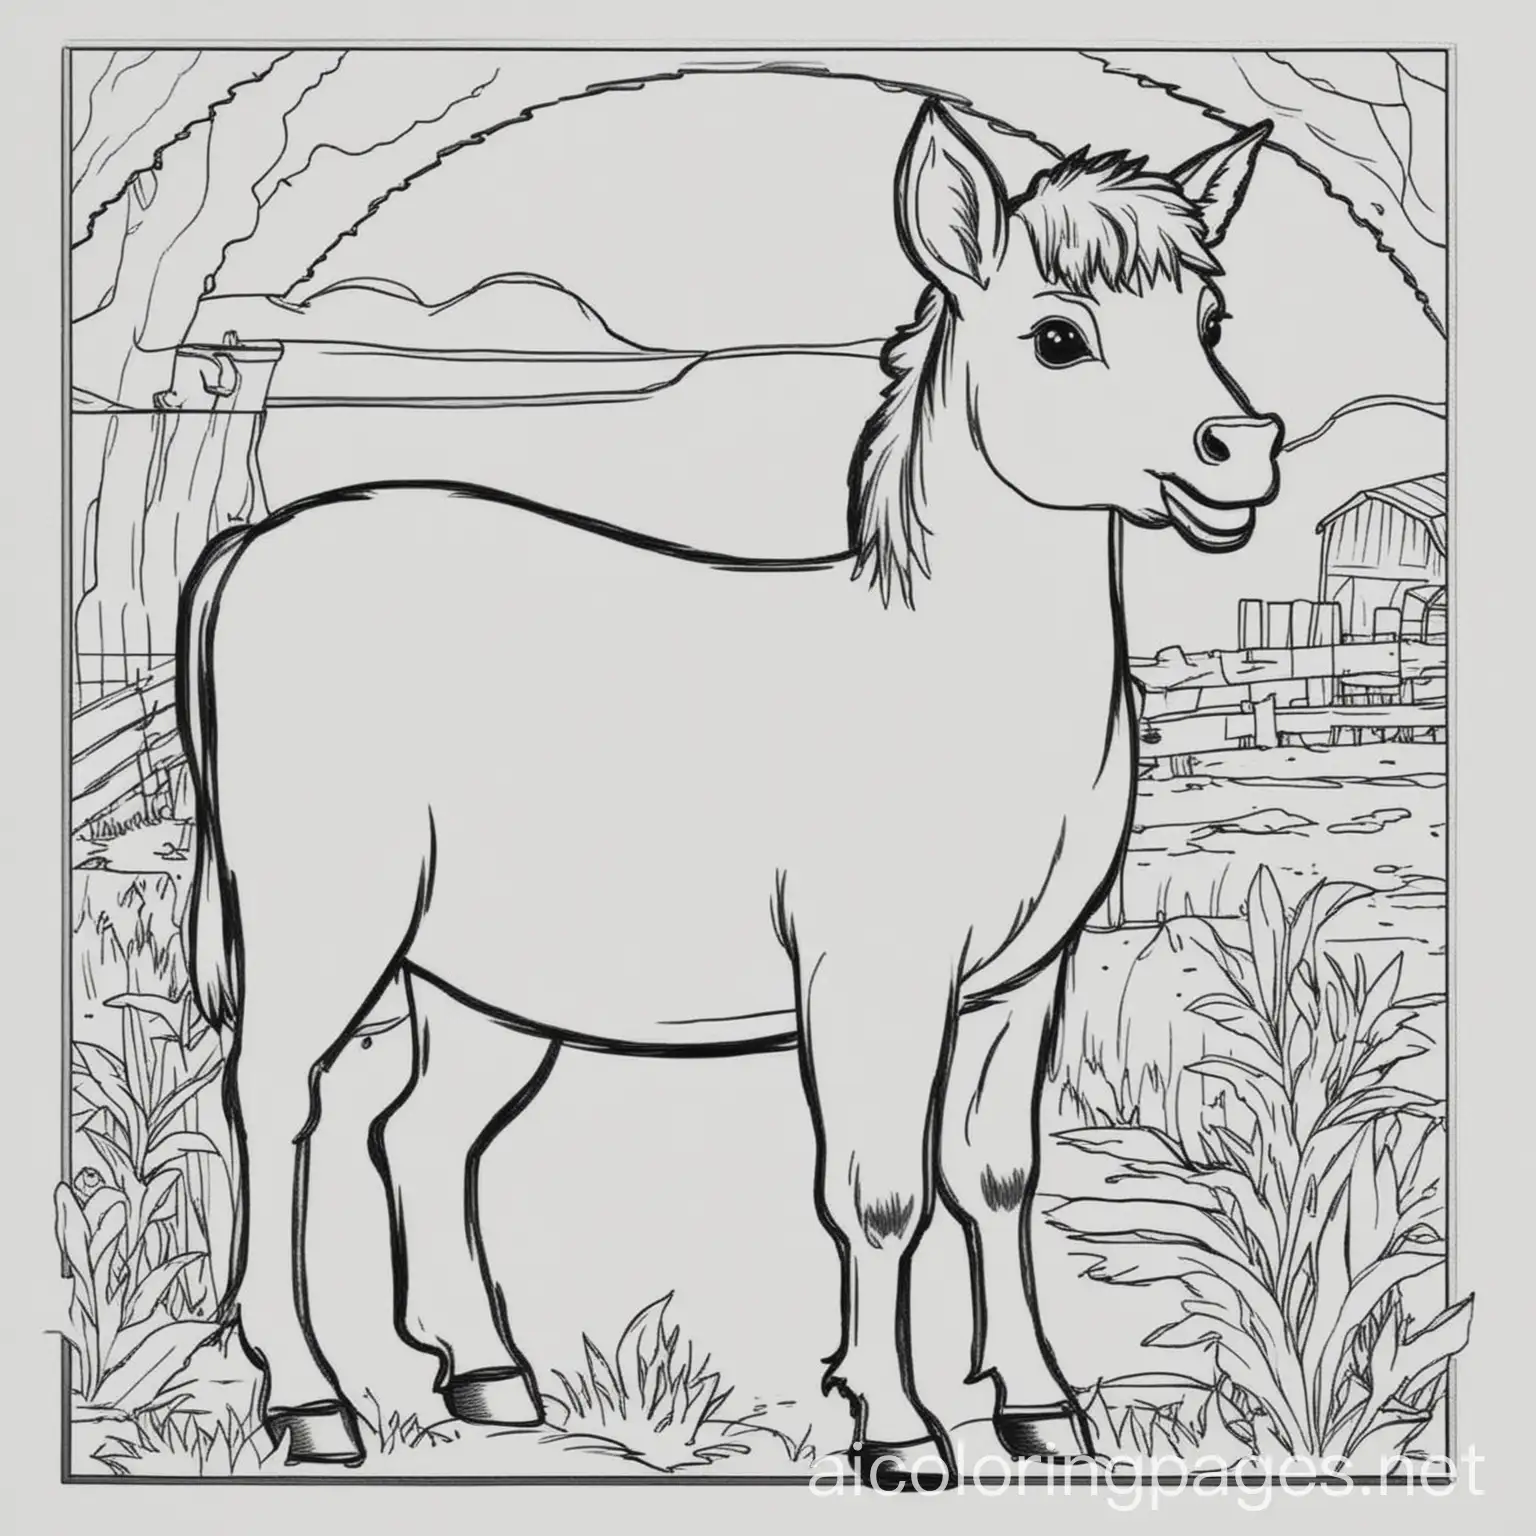 create farm animal coloring pages for kids, Coloring Page, black and white, line art, white background, Simplicity, Ample White Space. The background of the coloring page is plain white to make it easy for young children to color within the lines. The outlines of all the subjects are easy to distinguish, making it simple for kids to color without too much difficulty